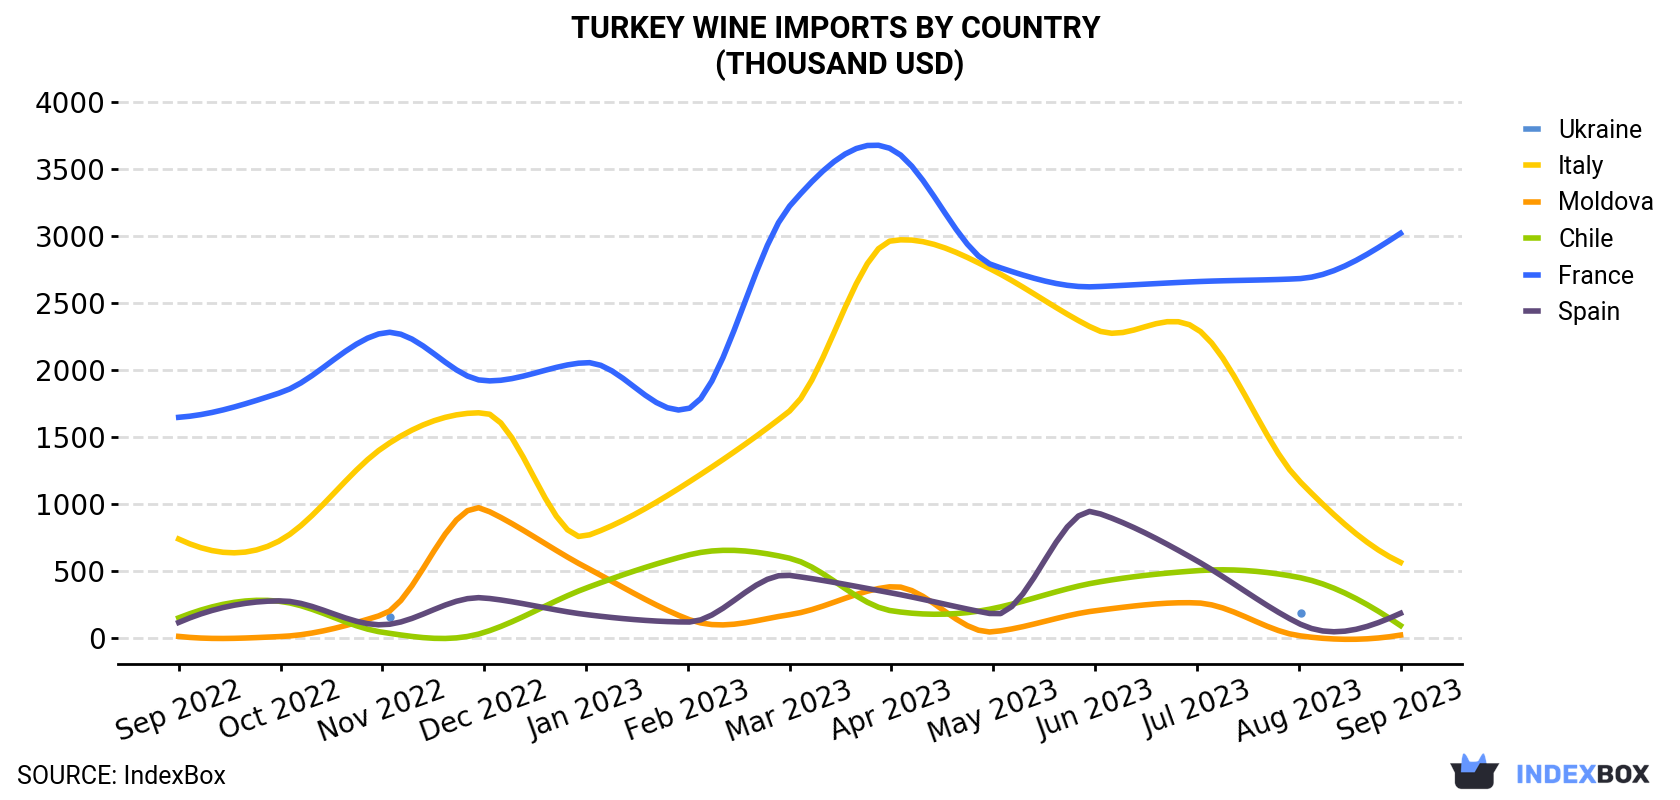 Turkey Wine Imports By Country (Thousand USD)